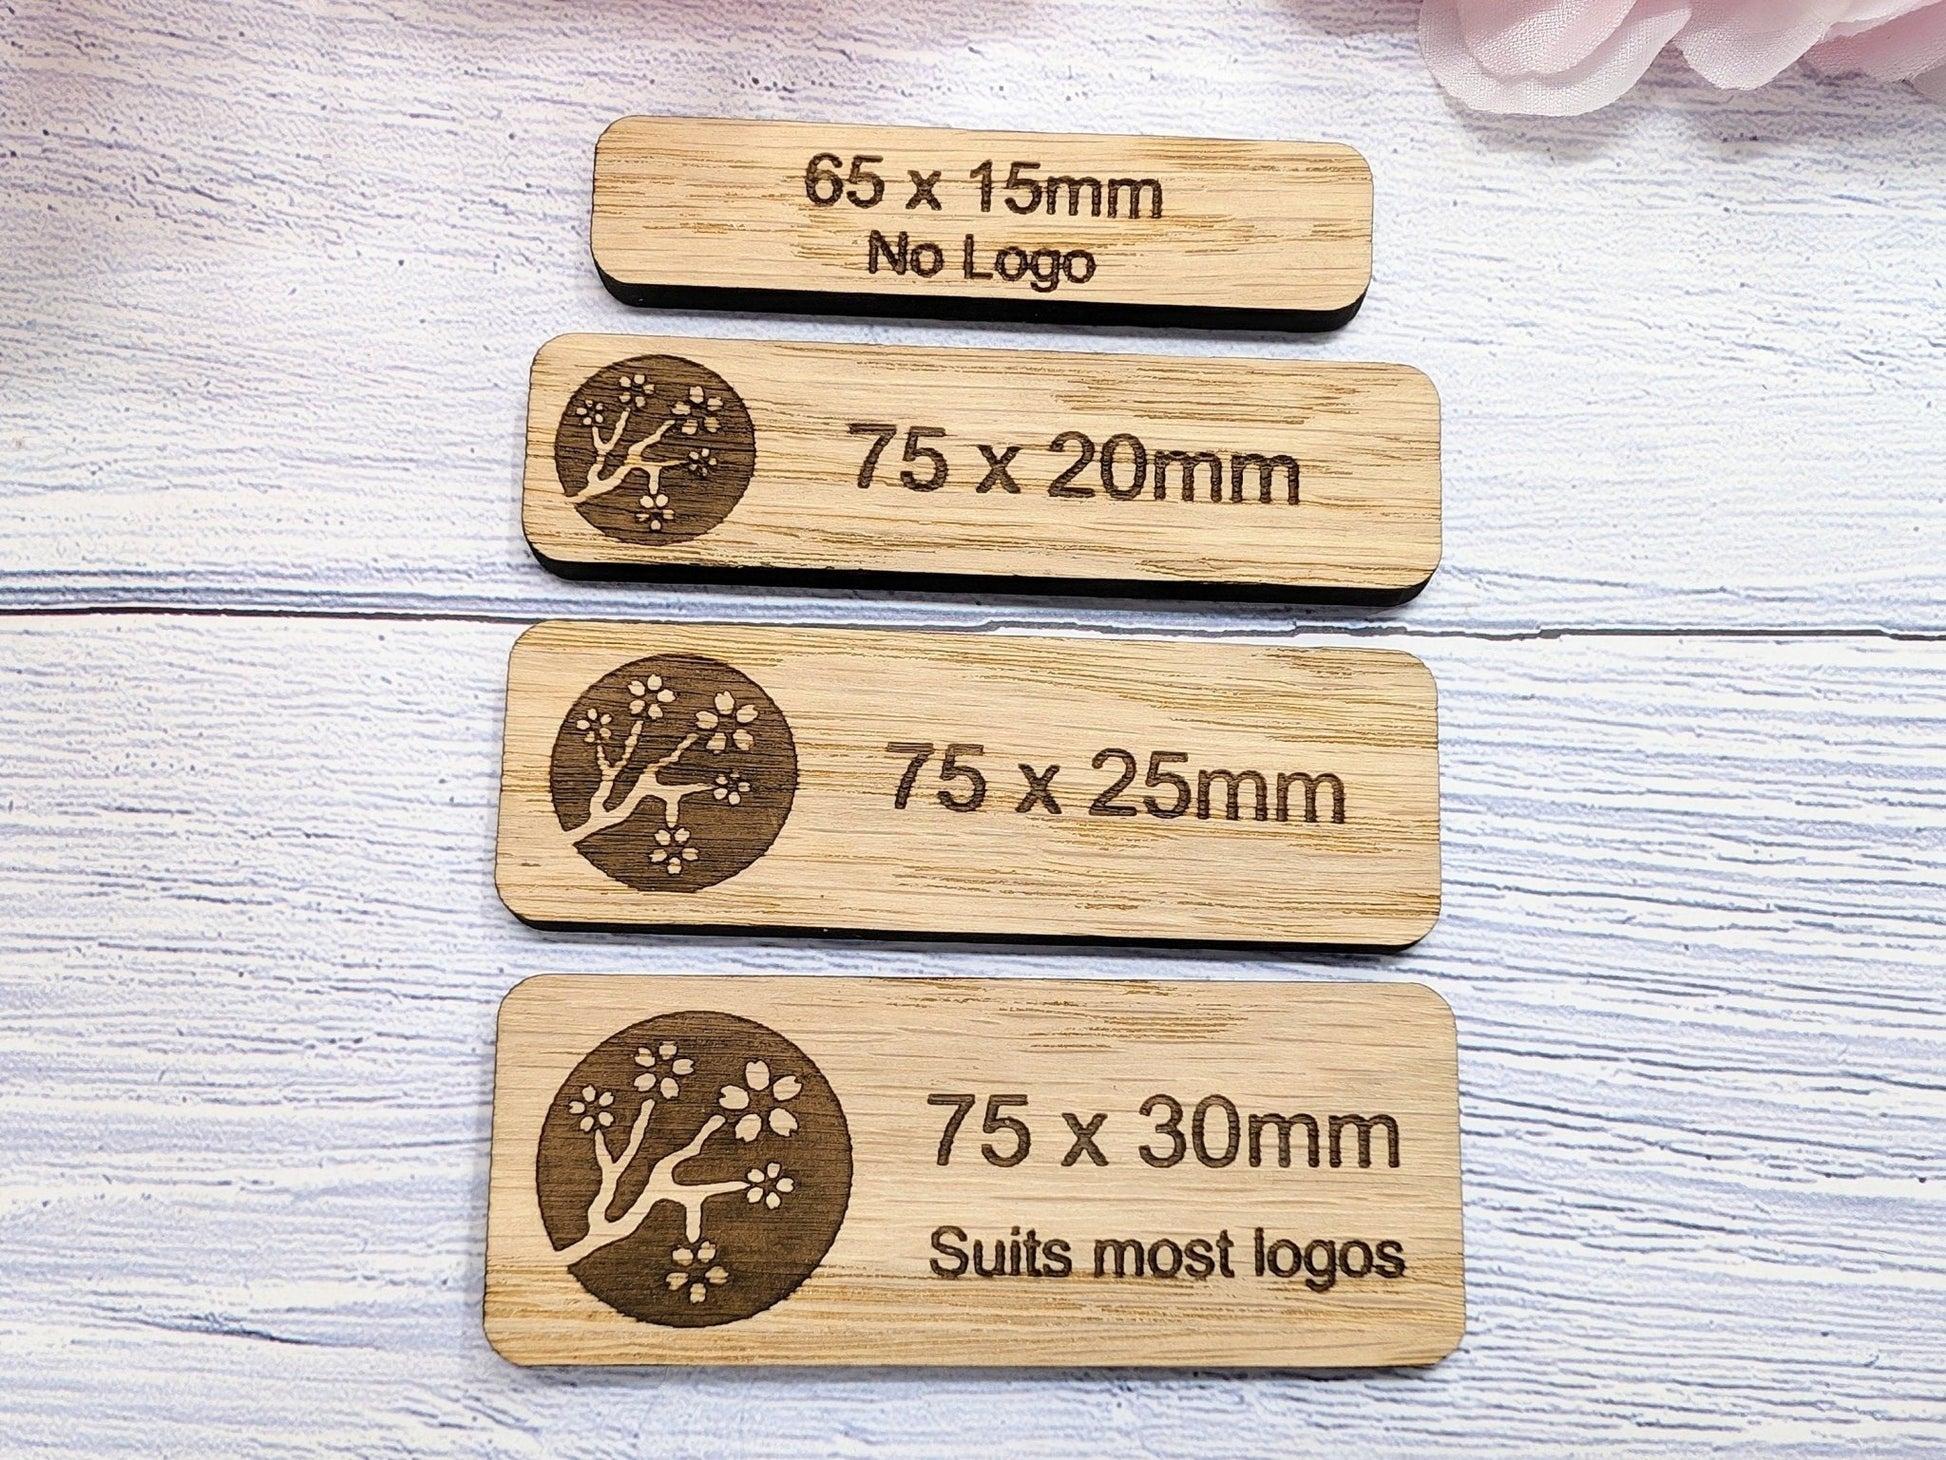 Custom Oak Veneered Name Badges - Business & Retail, Eco-Friendly, Multiple Sizes/Attachments, Personalized for Cafes, Charities - CherryGroveCraft